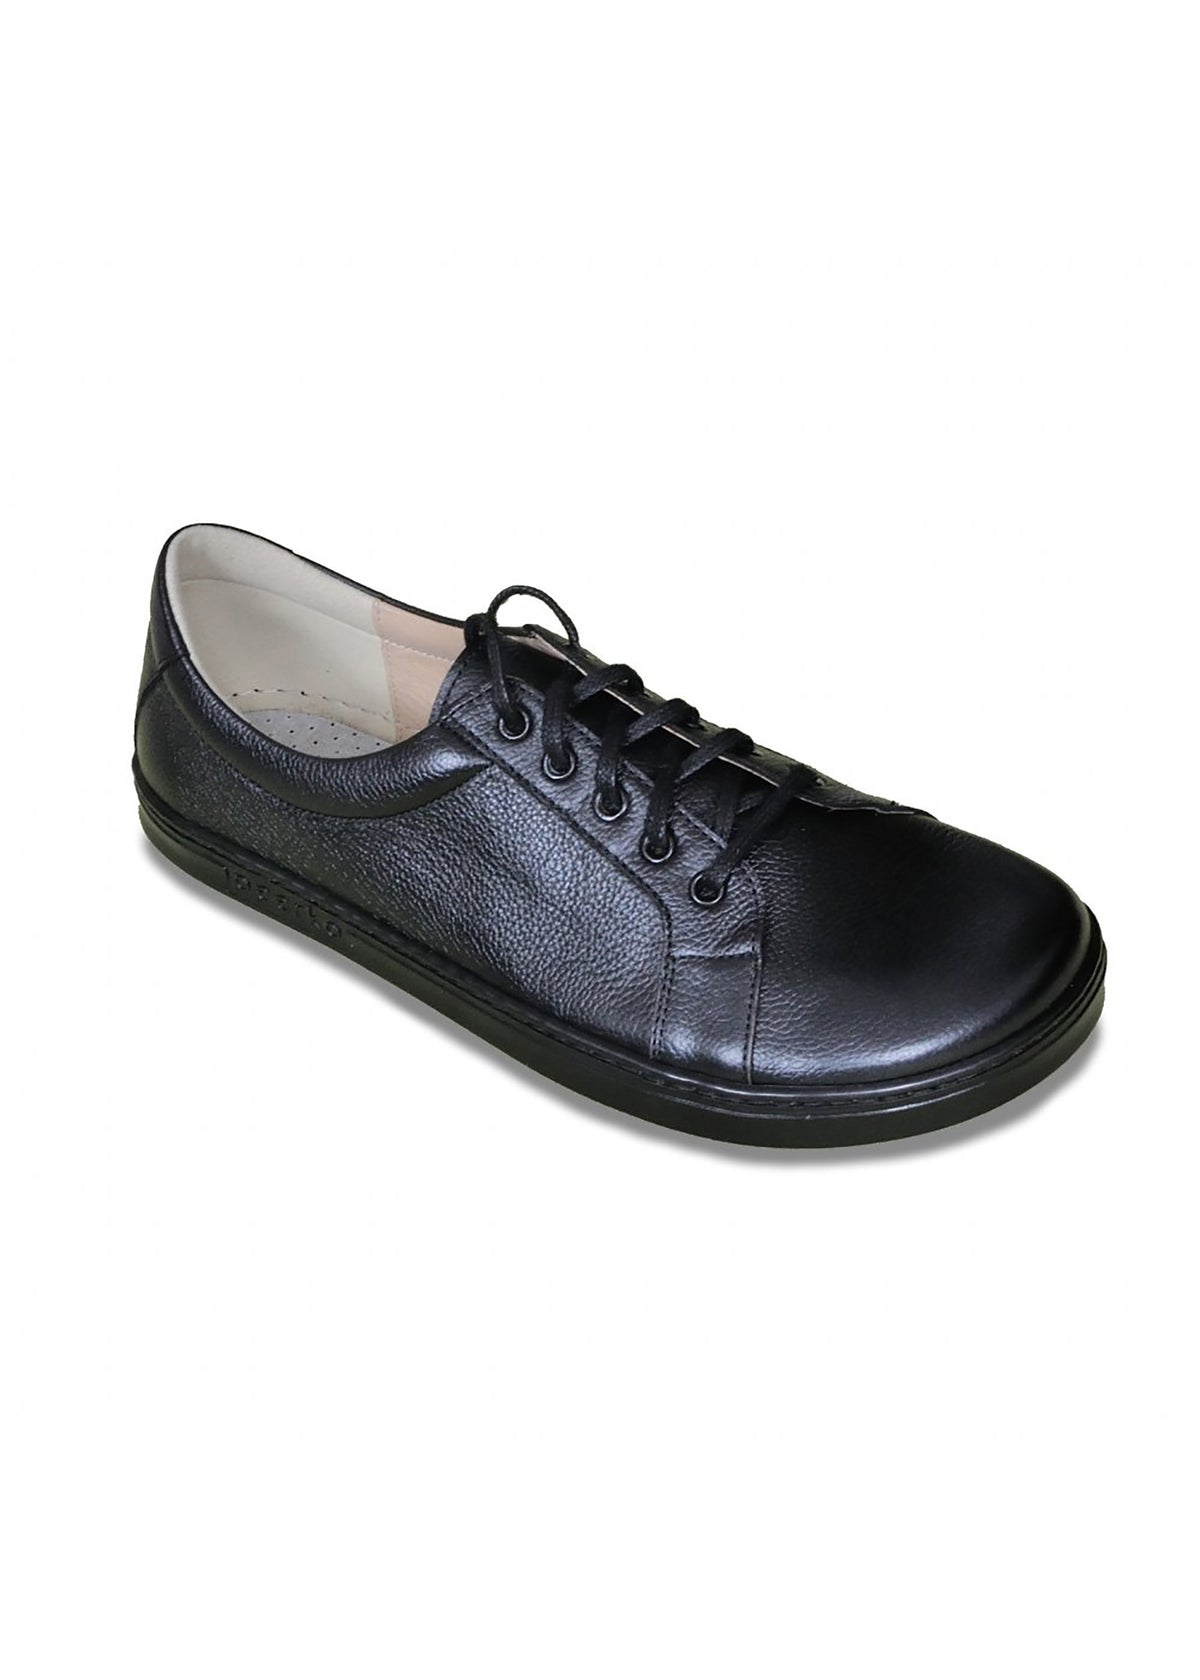 Barefoot shoes, Low-top sneakers - Classic Black